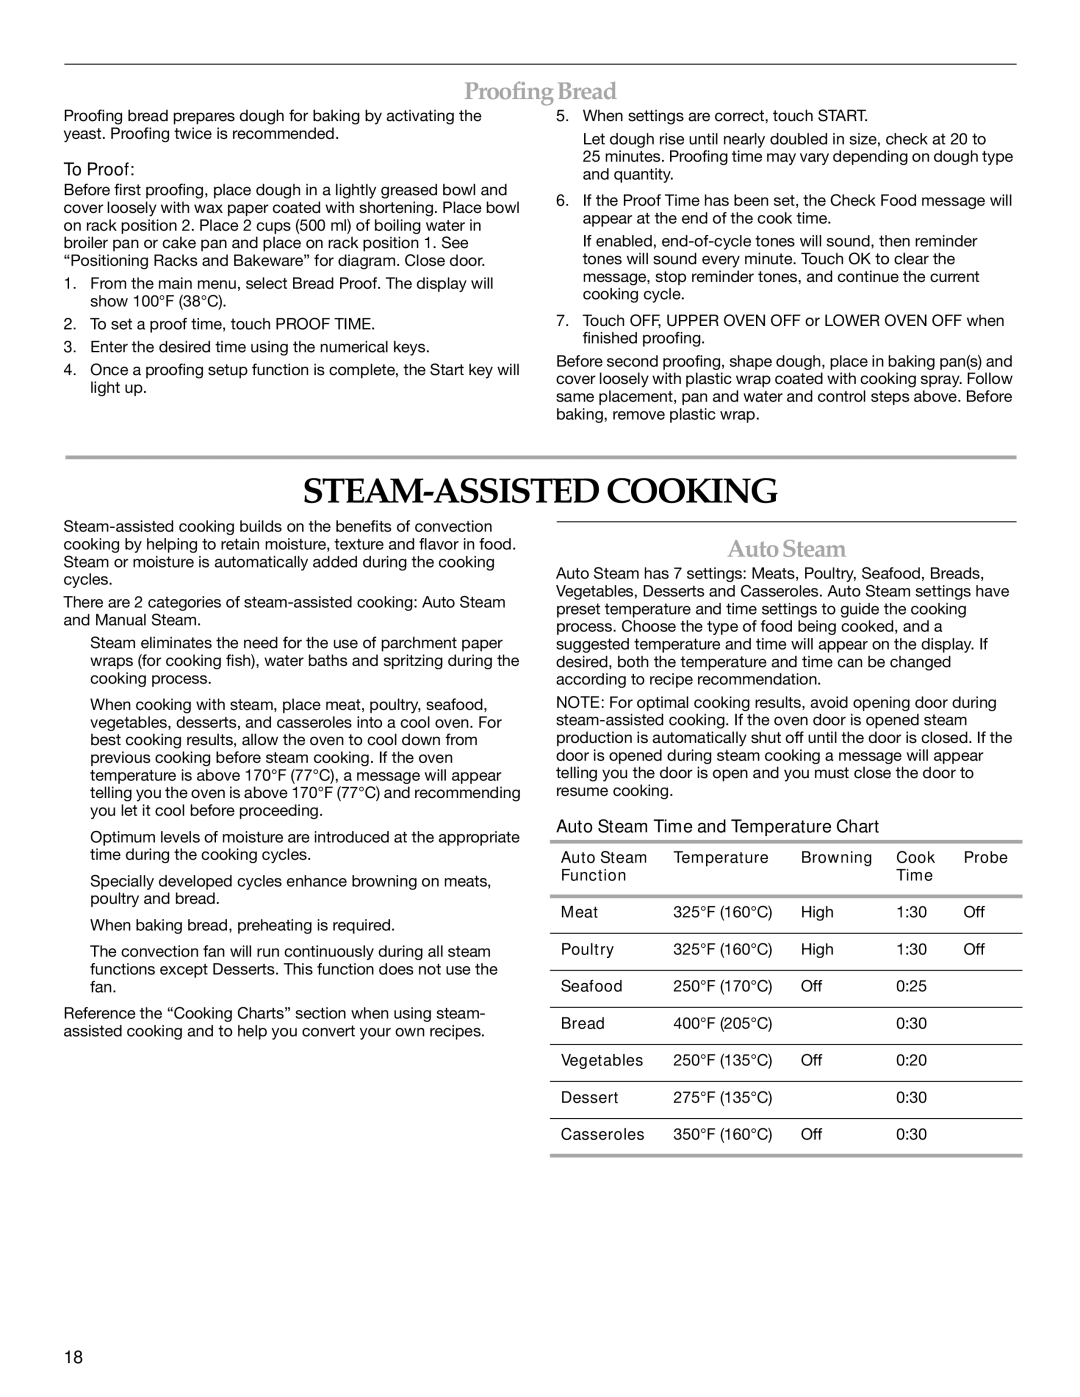 KitchenAid KEBU208 manual STEAM-ASSISTED Cooking, ProofingBread, AutoSteam, To Proof, Auto Steam Time and Temperature Chart 